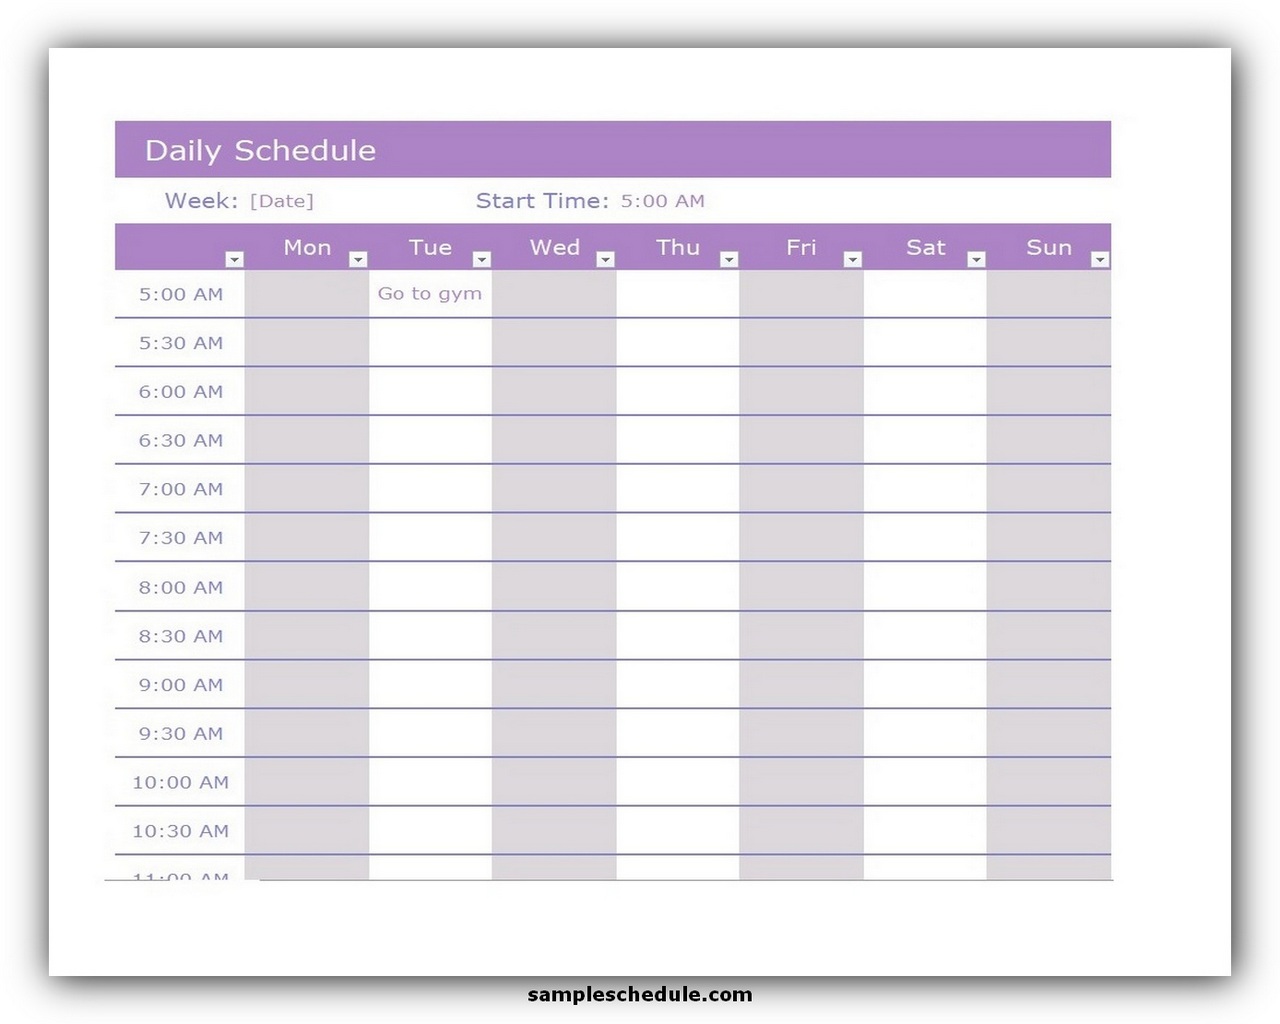 free microsoft excel weekly schedule template